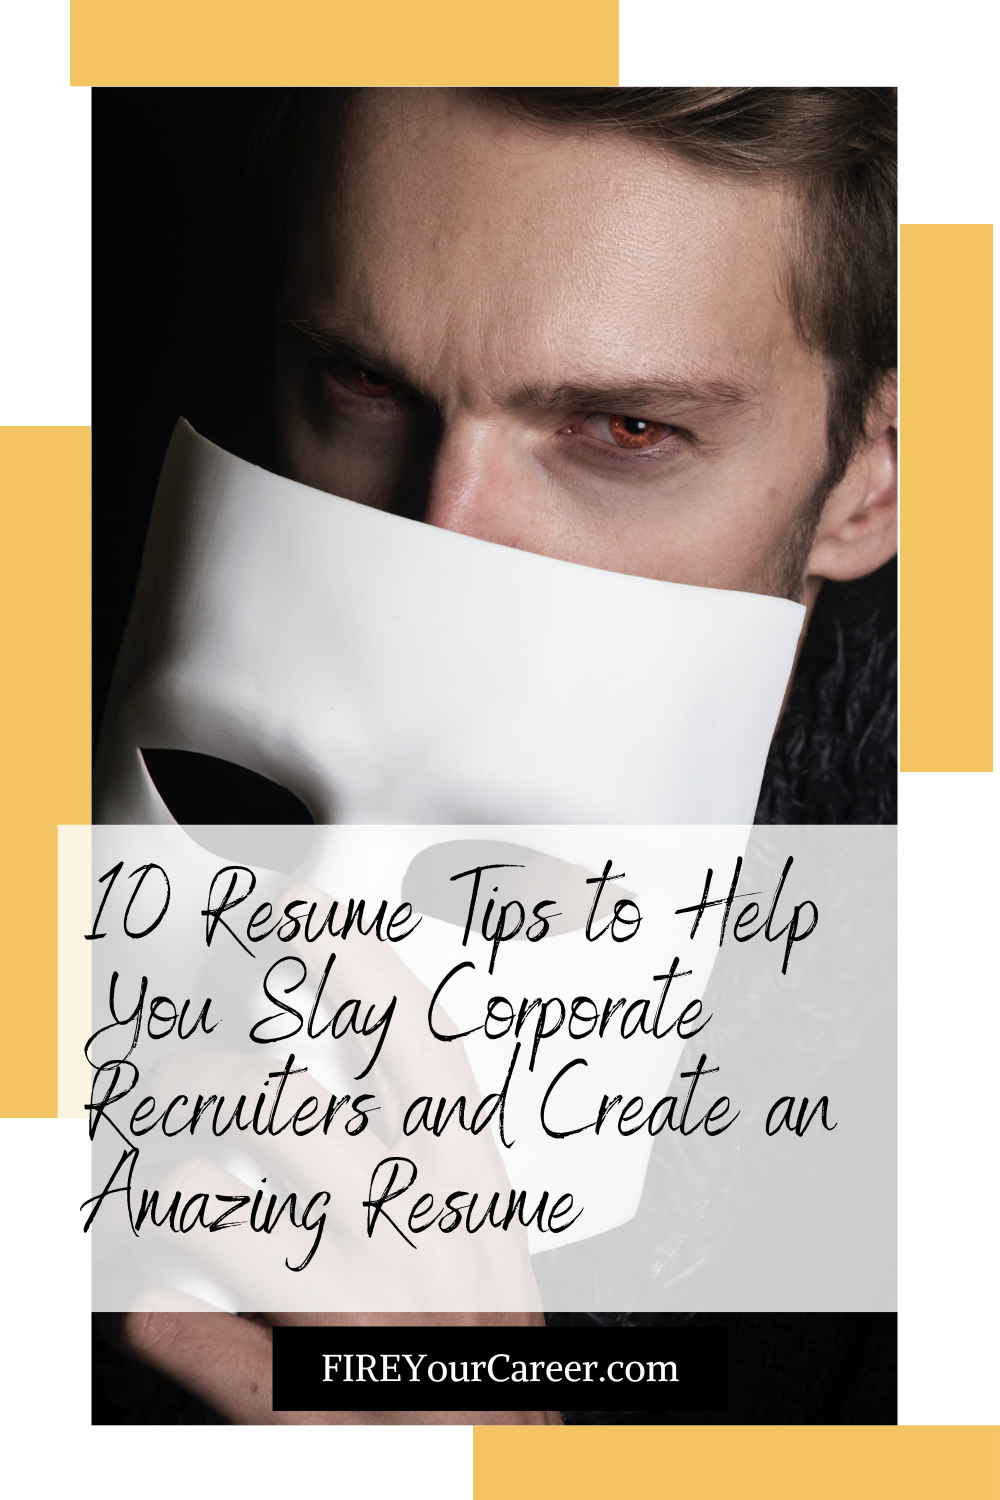 10 Resume Tips to Help You Slay Corporate Recruiters and Create an Amazing Resume Pinterest